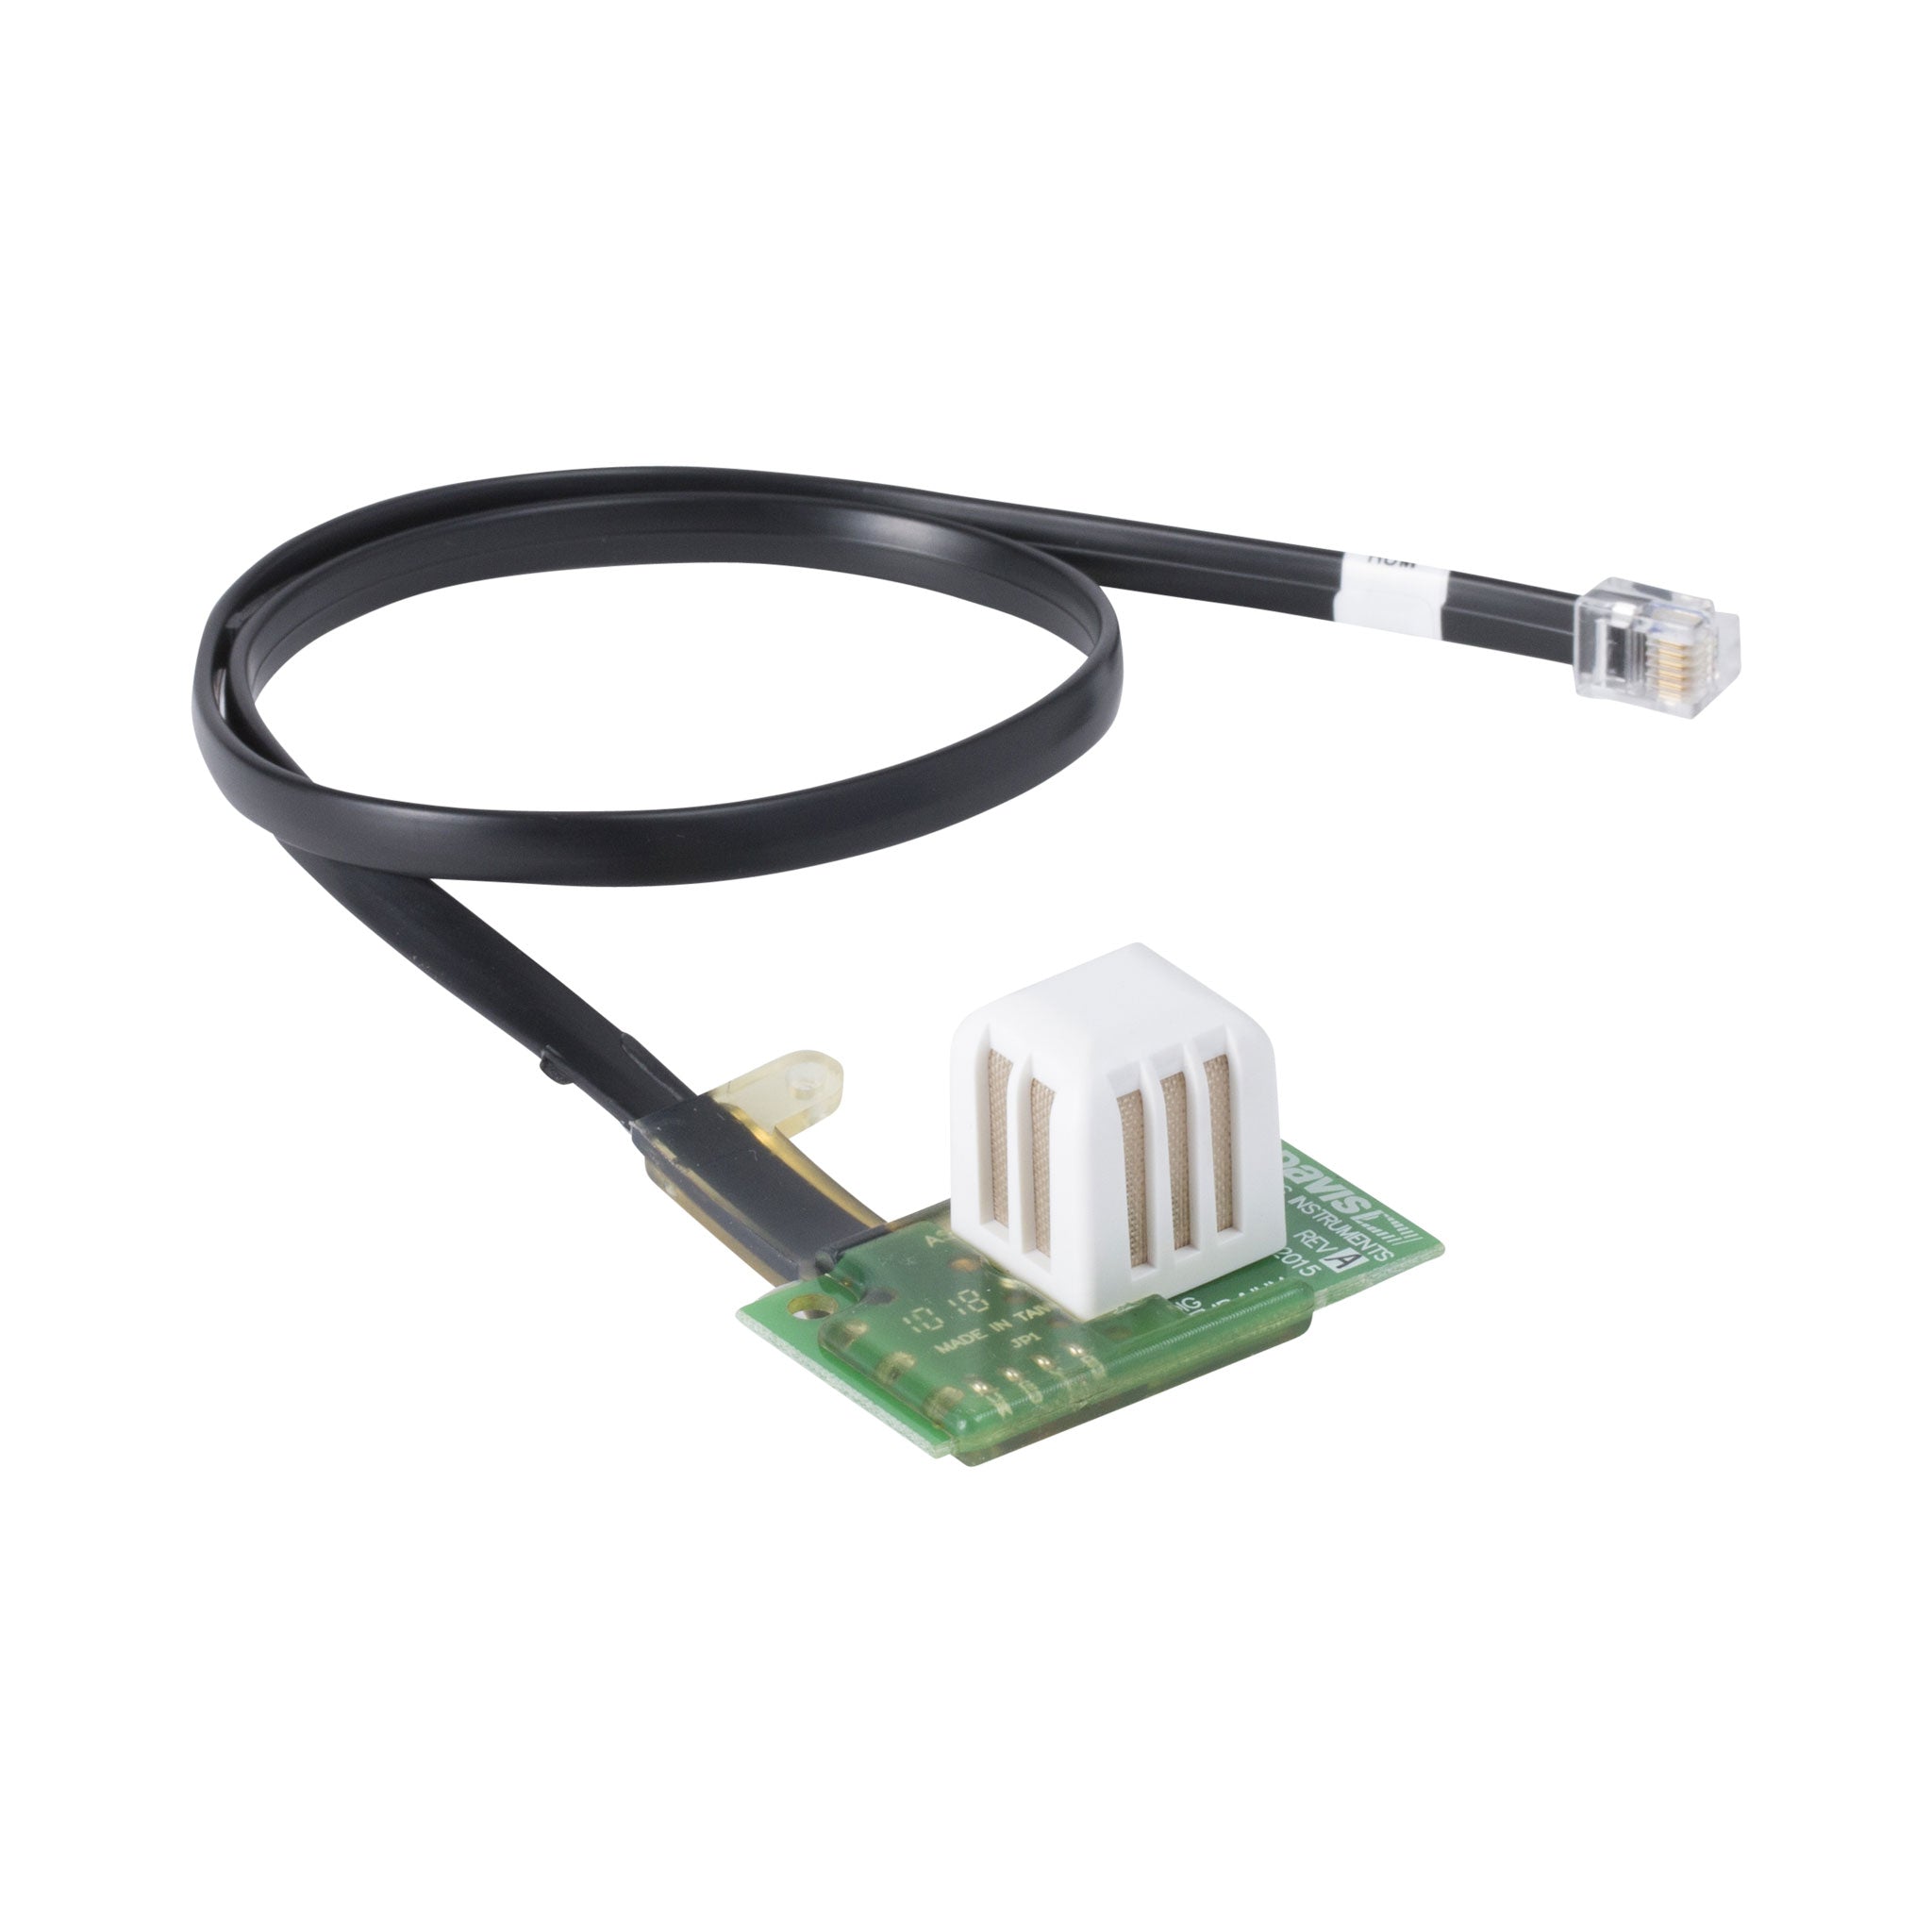 Room Temperature and Humidity Sensor - Weather Sensor and Parts